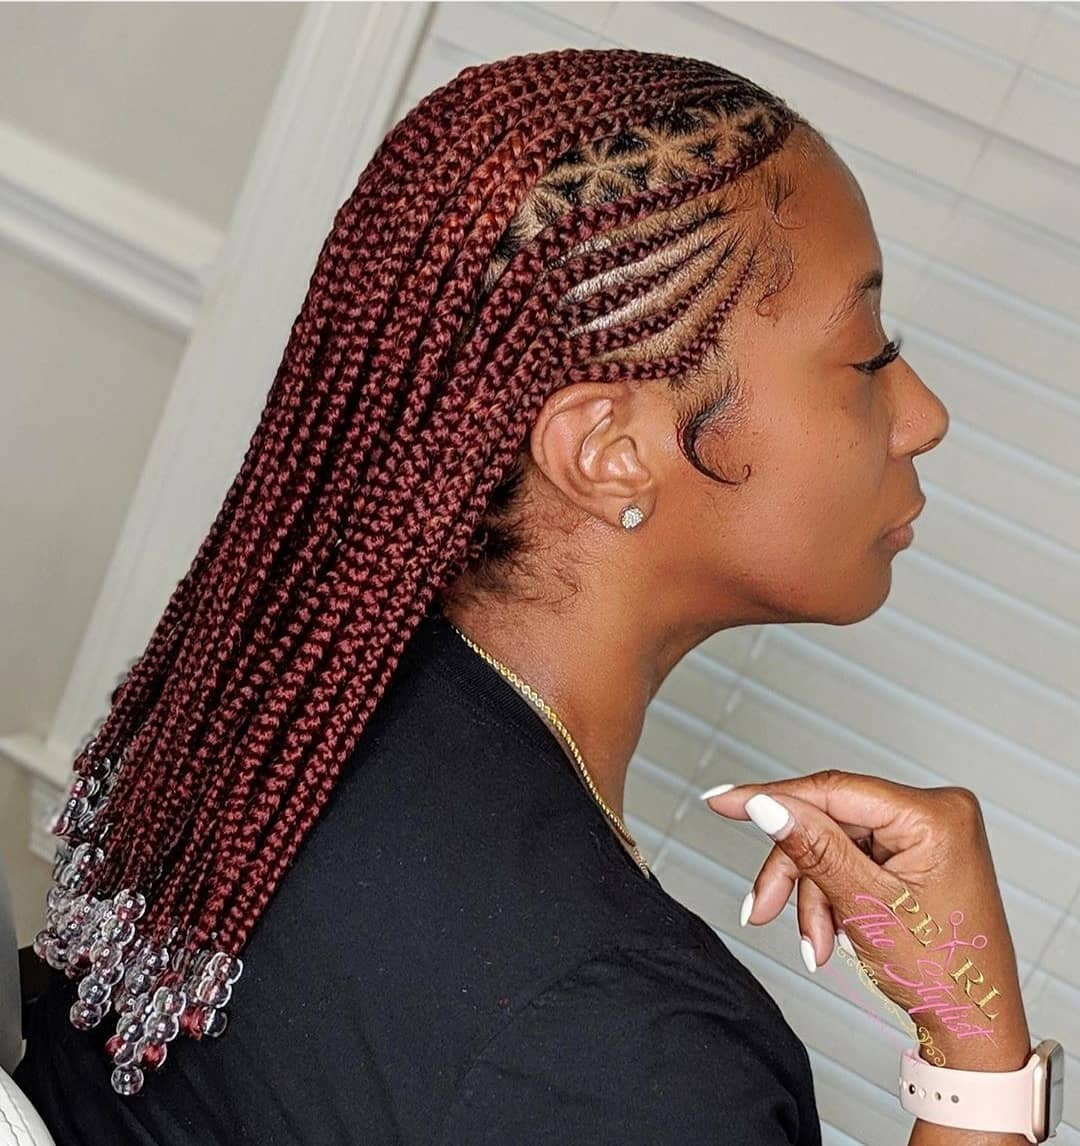 Braiding Hairstyles 2020
 2020 Braided Hairstyles That Are Totally Hip and Cute